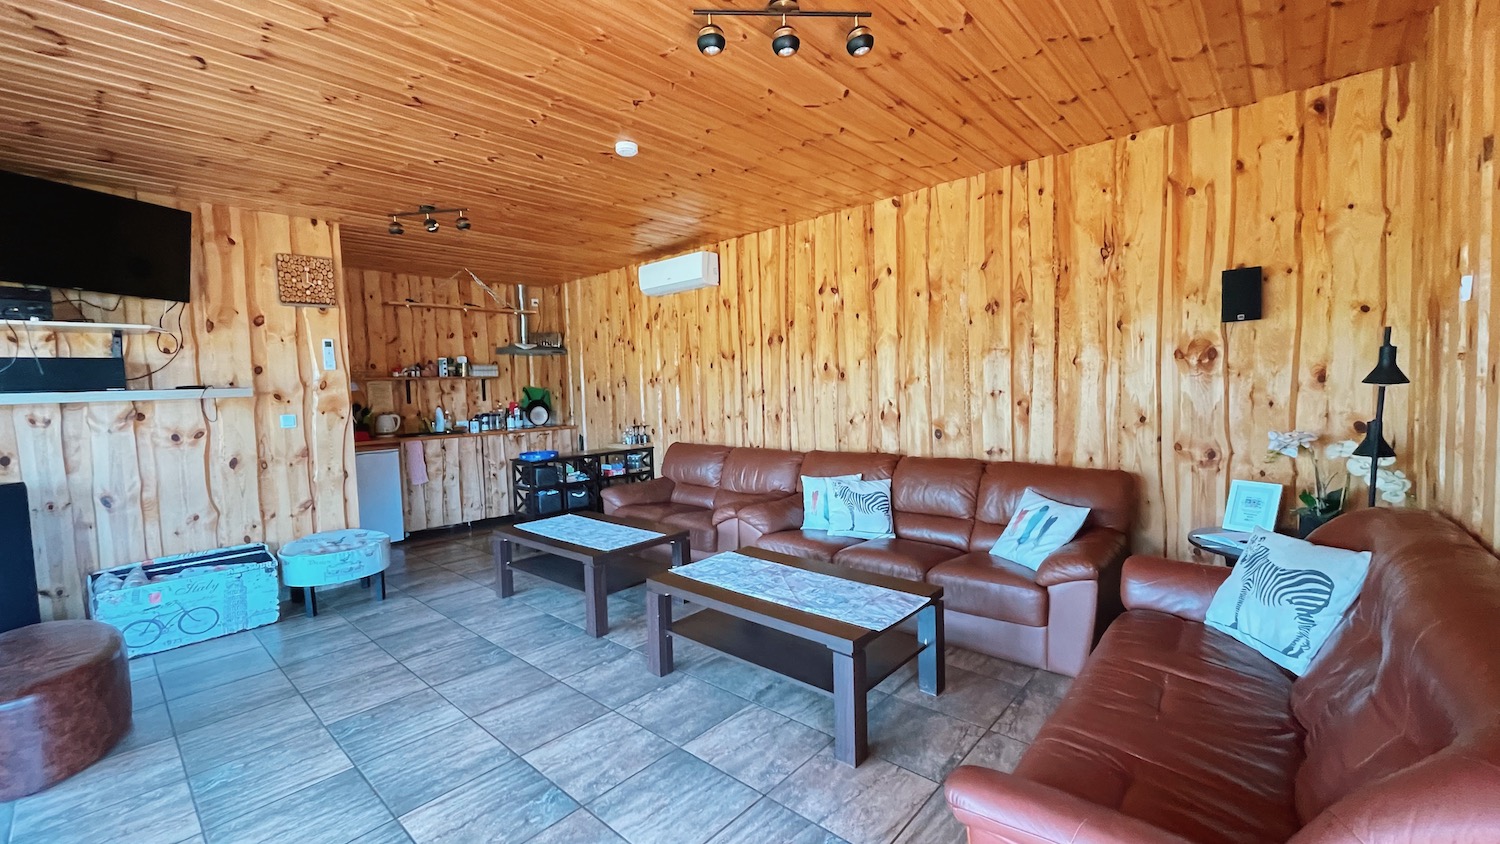 Best Estonian holiday homes in Estonia with a pont and sauna, Eesti Paigad